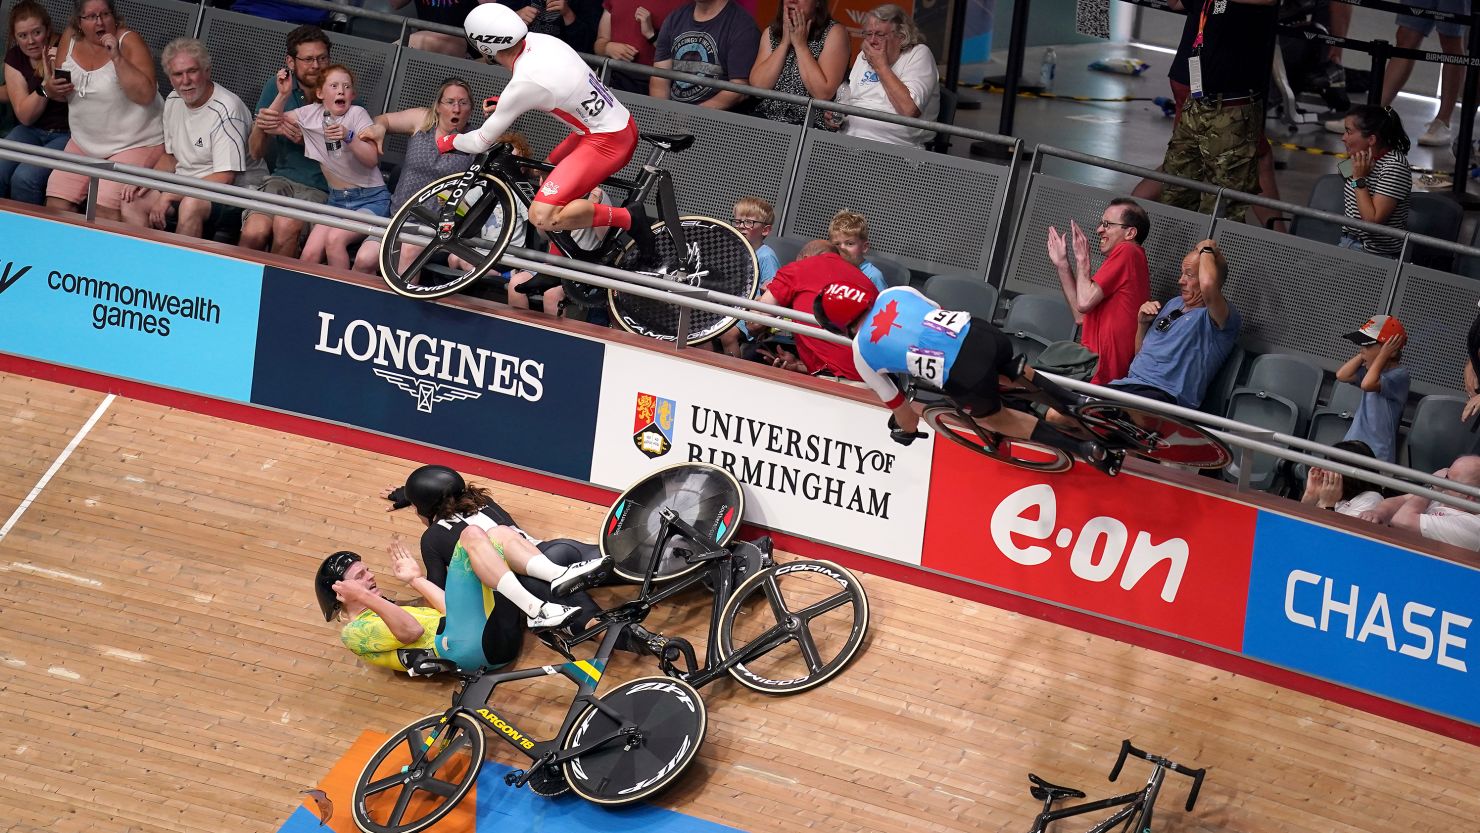 A crash in the Men's 15km scratch race qualifying round as England's Matt Walls (no.29) and Canada's Derek Gee (no.15) go over the barrier into the crowd in London on July 31, 2022.